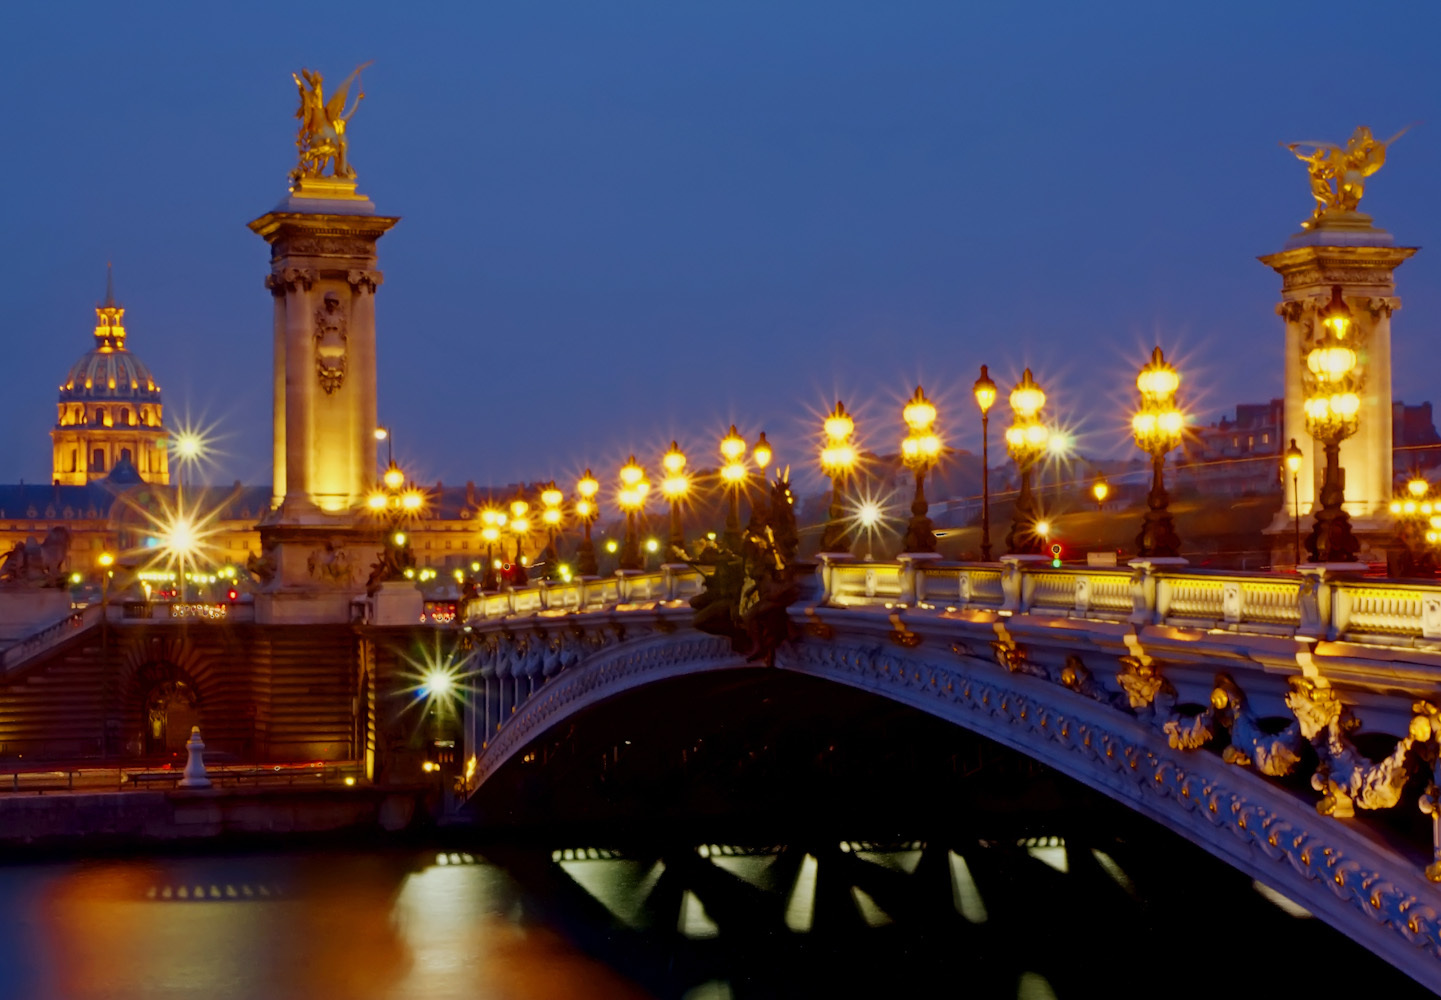 Top 10 places you must see in town of love-Paris, France ...